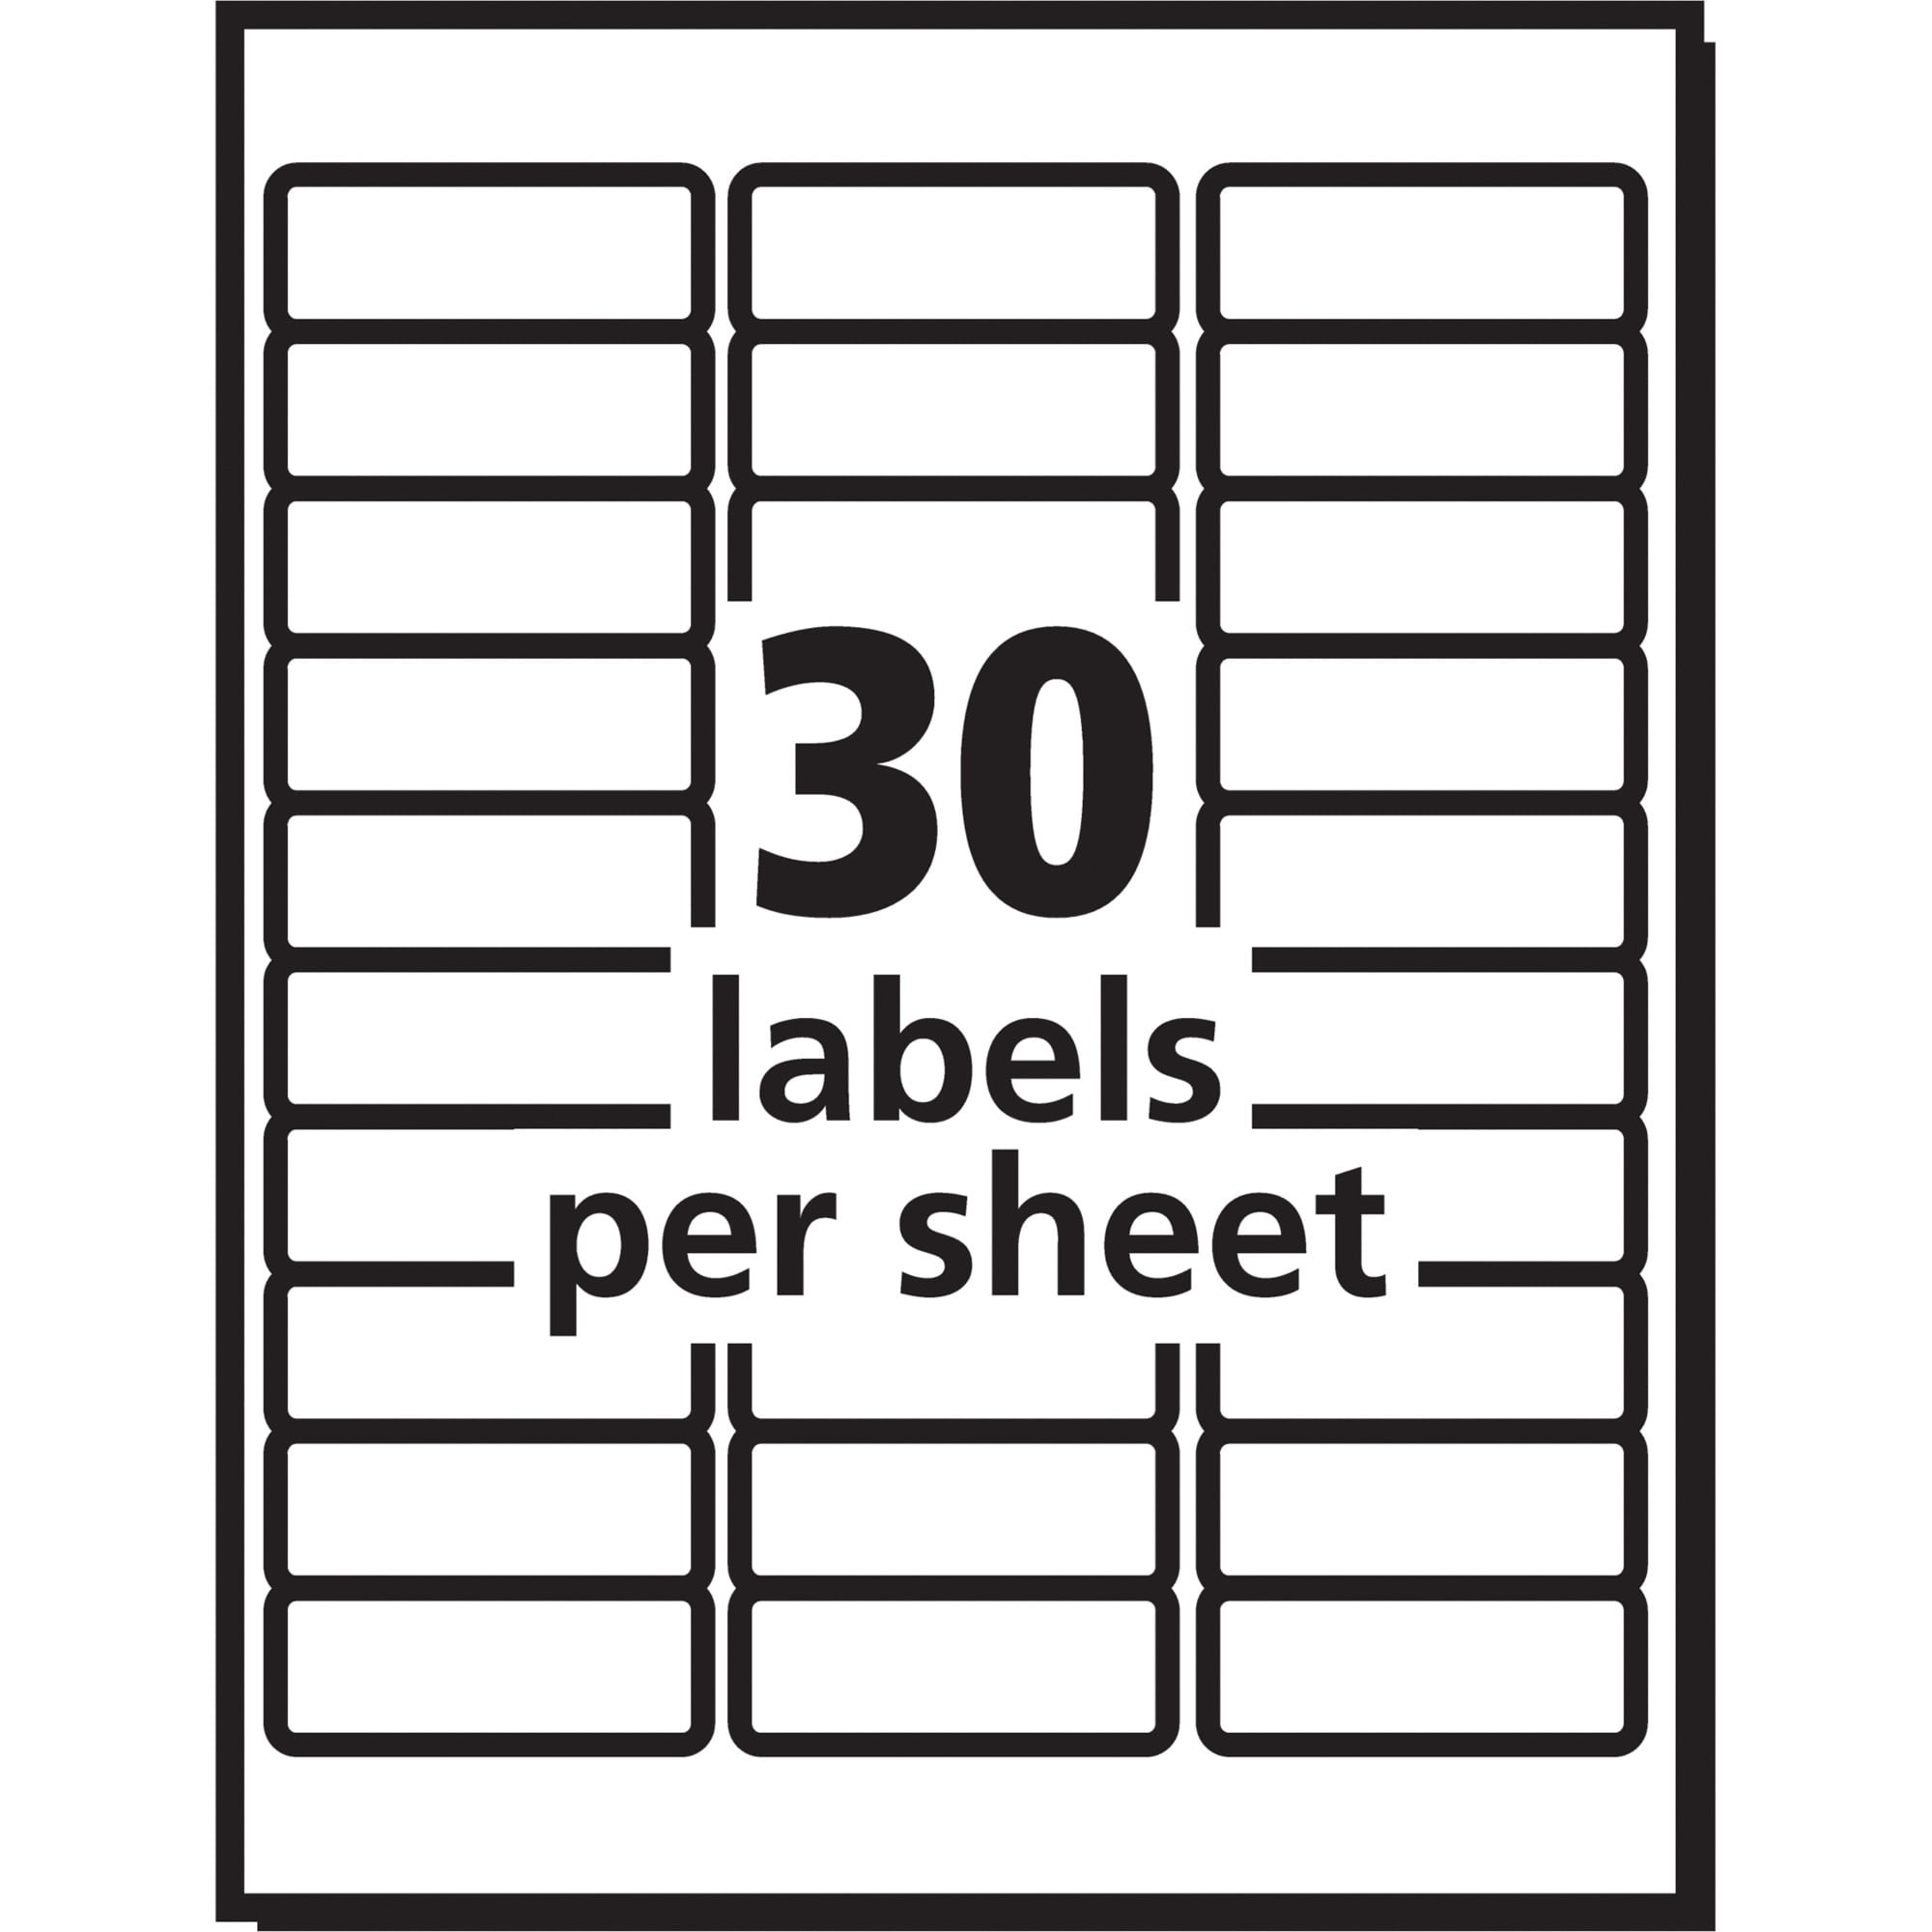 24 Free 24 Label Template - Labels Database 24 For 33 Up Label Template Word